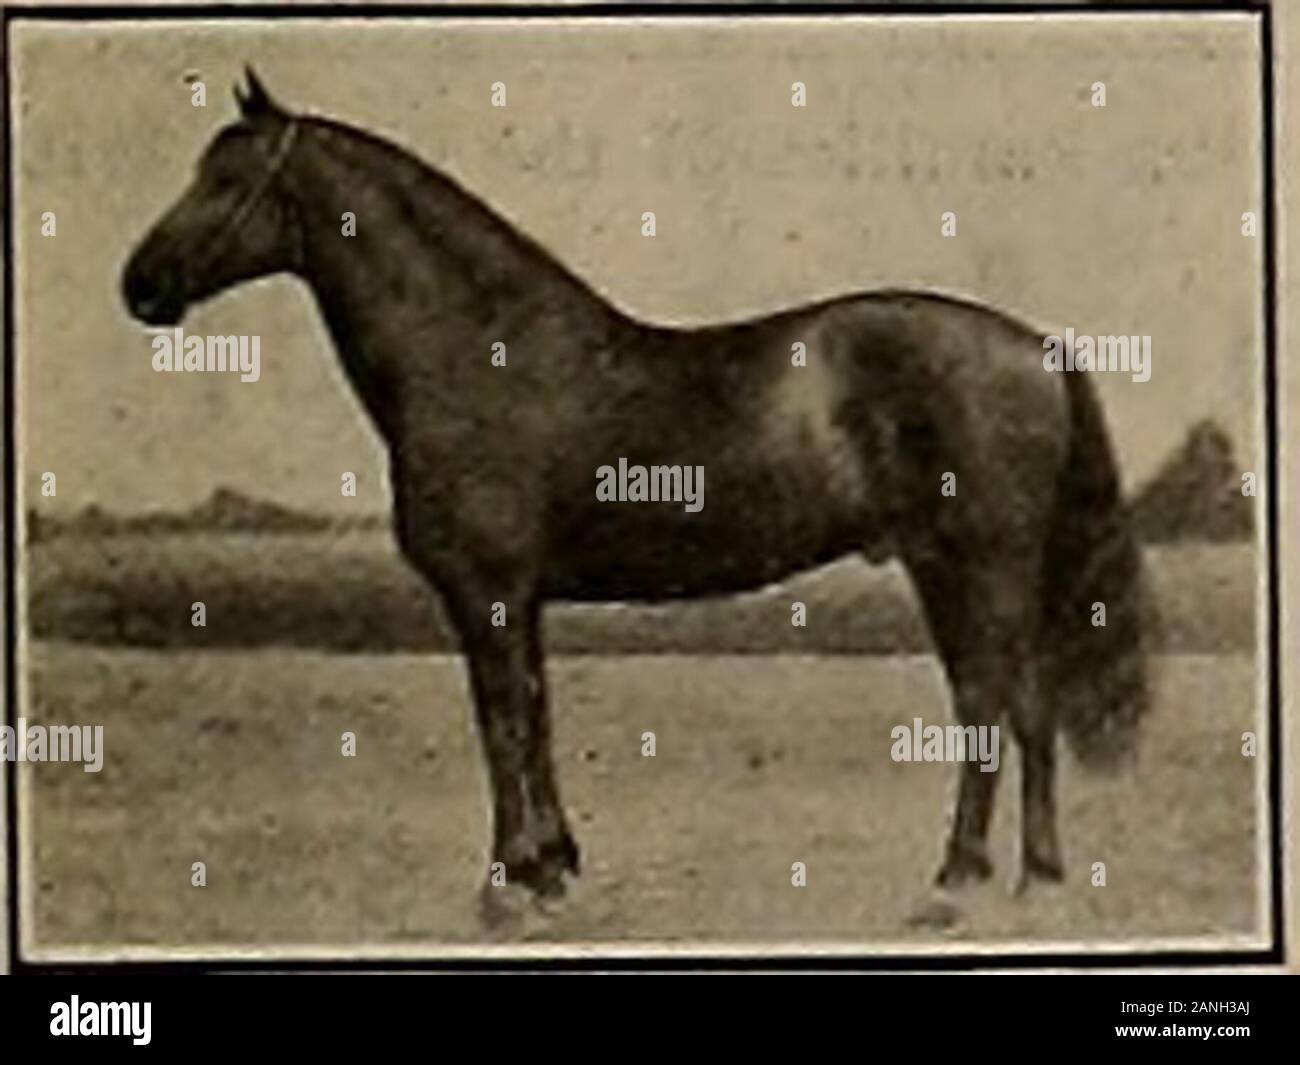 Breeder and sportsman . Bay stallion, stands 15.3 hands, weighs 1150. Siredby Athadon (1) 2:27 (sire of The Donna 2:07%,Athasham 2:09*4, Sue 2:12, Listerine 2:13*4 and 8others in 2:30); dam the great brood mare CoraWickersham (also dam of Nogi (3) 2:17^, (4) 2:10^.winner of 3-year-old trotting division BreedersFuturity 1907 and Occident and Stanford Stakes ofsame year), by Junio 2:22^ (sire of dams of Geo. G.2:05%, etc.). Athasham has a great future beforehim as a sire. He is bred right and made right, andhas every qualification one can expect in a sire. Hehas been timed in 2:06% in a race, an Stock Photo